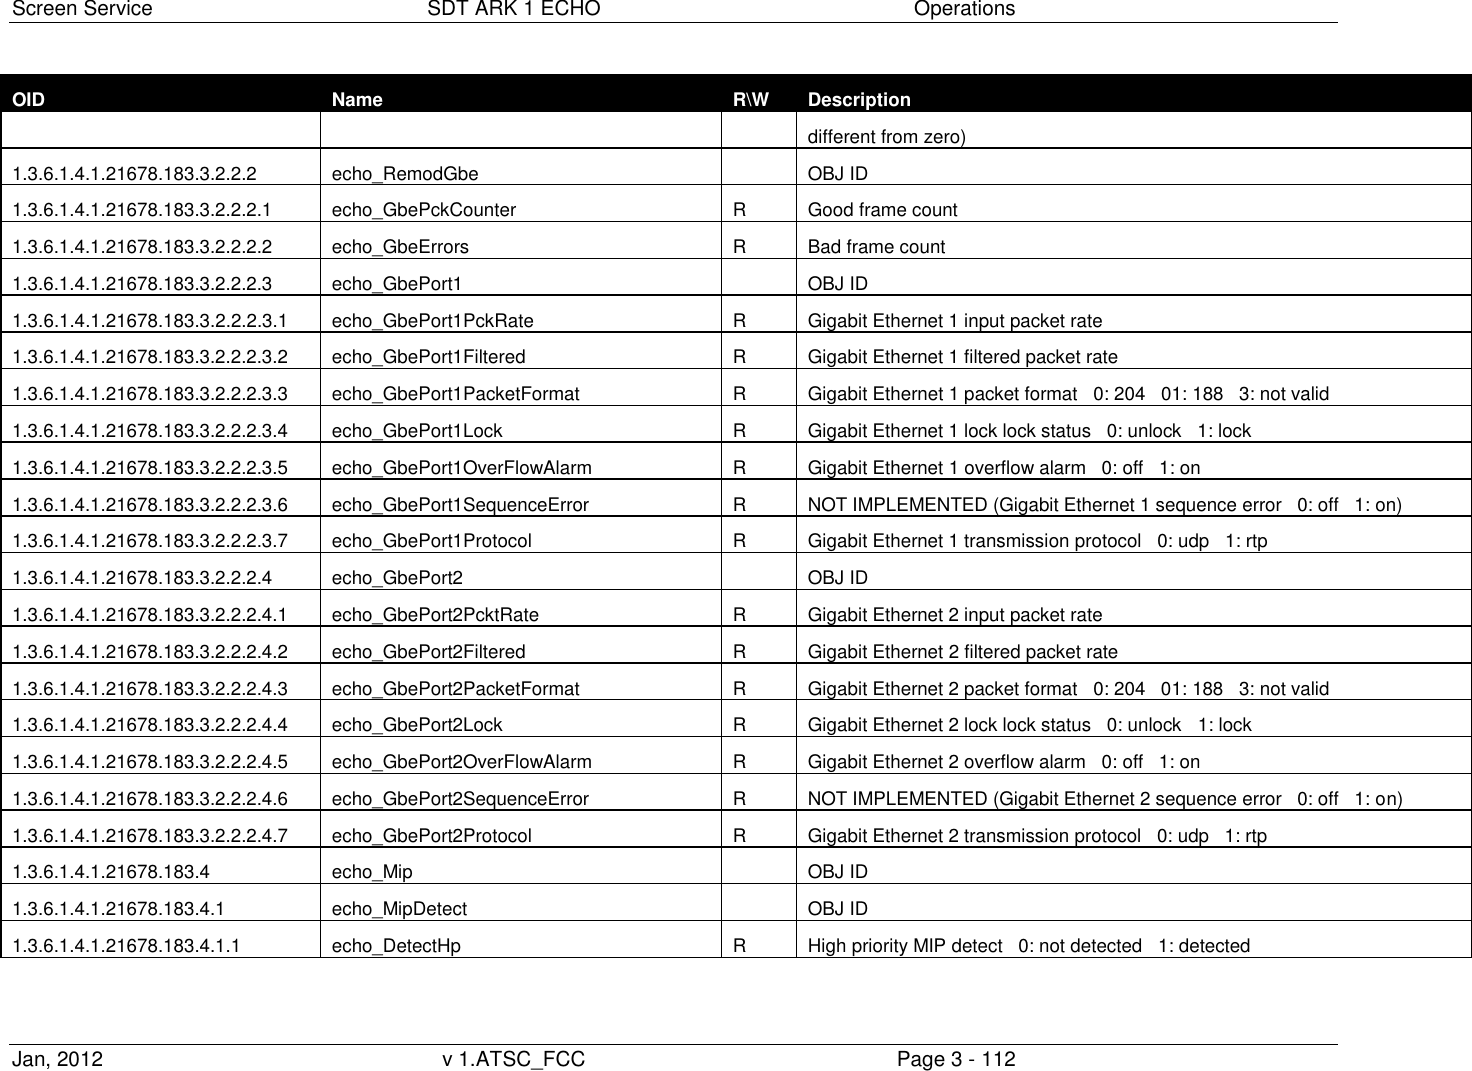 Screen Service  SDT ARK 1 ECHO  Operations Jan, 2012  v 1.ATSC_FCC  Page 3 - 112 OID Name R\W Description different from zero) 1.3.6.1.4.1.21678.183.3.2.2.2 echo_RemodGbe  OBJ ID 1.3.6.1.4.1.21678.183.3.2.2.2.1 echo_GbePckCounter R Good frame count 1.3.6.1.4.1.21678.183.3.2.2.2.2 echo_GbeErrors R Bad frame count 1.3.6.1.4.1.21678.183.3.2.2.2.3 echo_GbePort1  OBJ ID 1.3.6.1.4.1.21678.183.3.2.2.2.3.1 echo_GbePort1PckRate R Gigabit Ethernet 1 input packet rate 1.3.6.1.4.1.21678.183.3.2.2.2.3.2 echo_GbePort1Filtered R Gigabit Ethernet 1 filtered packet rate 1.3.6.1.4.1.21678.183.3.2.2.2.3.3 echo_GbePort1PacketFormat R Gigabit Ethernet 1 packet format   0: 204   01: 188   3: not valid 1.3.6.1.4.1.21678.183.3.2.2.2.3.4 echo_GbePort1Lock R Gigabit Ethernet 1 lock lock status   0: unlock   1: lock 1.3.6.1.4.1.21678.183.3.2.2.2.3.5 echo_GbePort1OverFlowAlarm R Gigabit Ethernet 1 overflow alarm   0: off   1: on 1.3.6.1.4.1.21678.183.3.2.2.2.3.6 echo_GbePort1SequenceError R NOT IMPLEMENTED (Gigabit Ethernet 1 sequence error   0: off   1: on) 1.3.6.1.4.1.21678.183.3.2.2.2.3.7 echo_GbePort1Protocol R Gigabit Ethernet 1 transmission protocol   0: udp   1: rtp 1.3.6.1.4.1.21678.183.3.2.2.2.4 echo_GbePort2  OBJ ID 1.3.6.1.4.1.21678.183.3.2.2.2.4.1 echo_GbePort2PcktRate R Gigabit Ethernet 2 input packet rate 1.3.6.1.4.1.21678.183.3.2.2.2.4.2 echo_GbePort2Filtered R Gigabit Ethernet 2 filtered packet rate 1.3.6.1.4.1.21678.183.3.2.2.2.4.3 echo_GbePort2PacketFormat R Gigabit Ethernet 2 packet format   0: 204   01: 188   3: not valid 1.3.6.1.4.1.21678.183.3.2.2.2.4.4 echo_GbePort2Lock R Gigabit Ethernet 2 lock lock status   0: unlock   1: lock 1.3.6.1.4.1.21678.183.3.2.2.2.4.5 echo_GbePort2OverFlowAlarm R Gigabit Ethernet 2 overflow alarm   0: off   1: on 1.3.6.1.4.1.21678.183.3.2.2.2.4.6 echo_GbePort2SequenceError R NOT IMPLEMENTED (Gigabit Ethernet 2 sequence error   0: off   1: on) 1.3.6.1.4.1.21678.183.3.2.2.2.4.7 echo_GbePort2Protocol R Gigabit Ethernet 2 transmission protocol   0: udp   1: rtp 1.3.6.1.4.1.21678.183.4 echo_Mip  OBJ ID 1.3.6.1.4.1.21678.183.4.1 echo_MipDetect  OBJ ID 1.3.6.1.4.1.21678.183.4.1.1 echo_DetectHp R High priority MIP detect   0: not detected   1: detected 